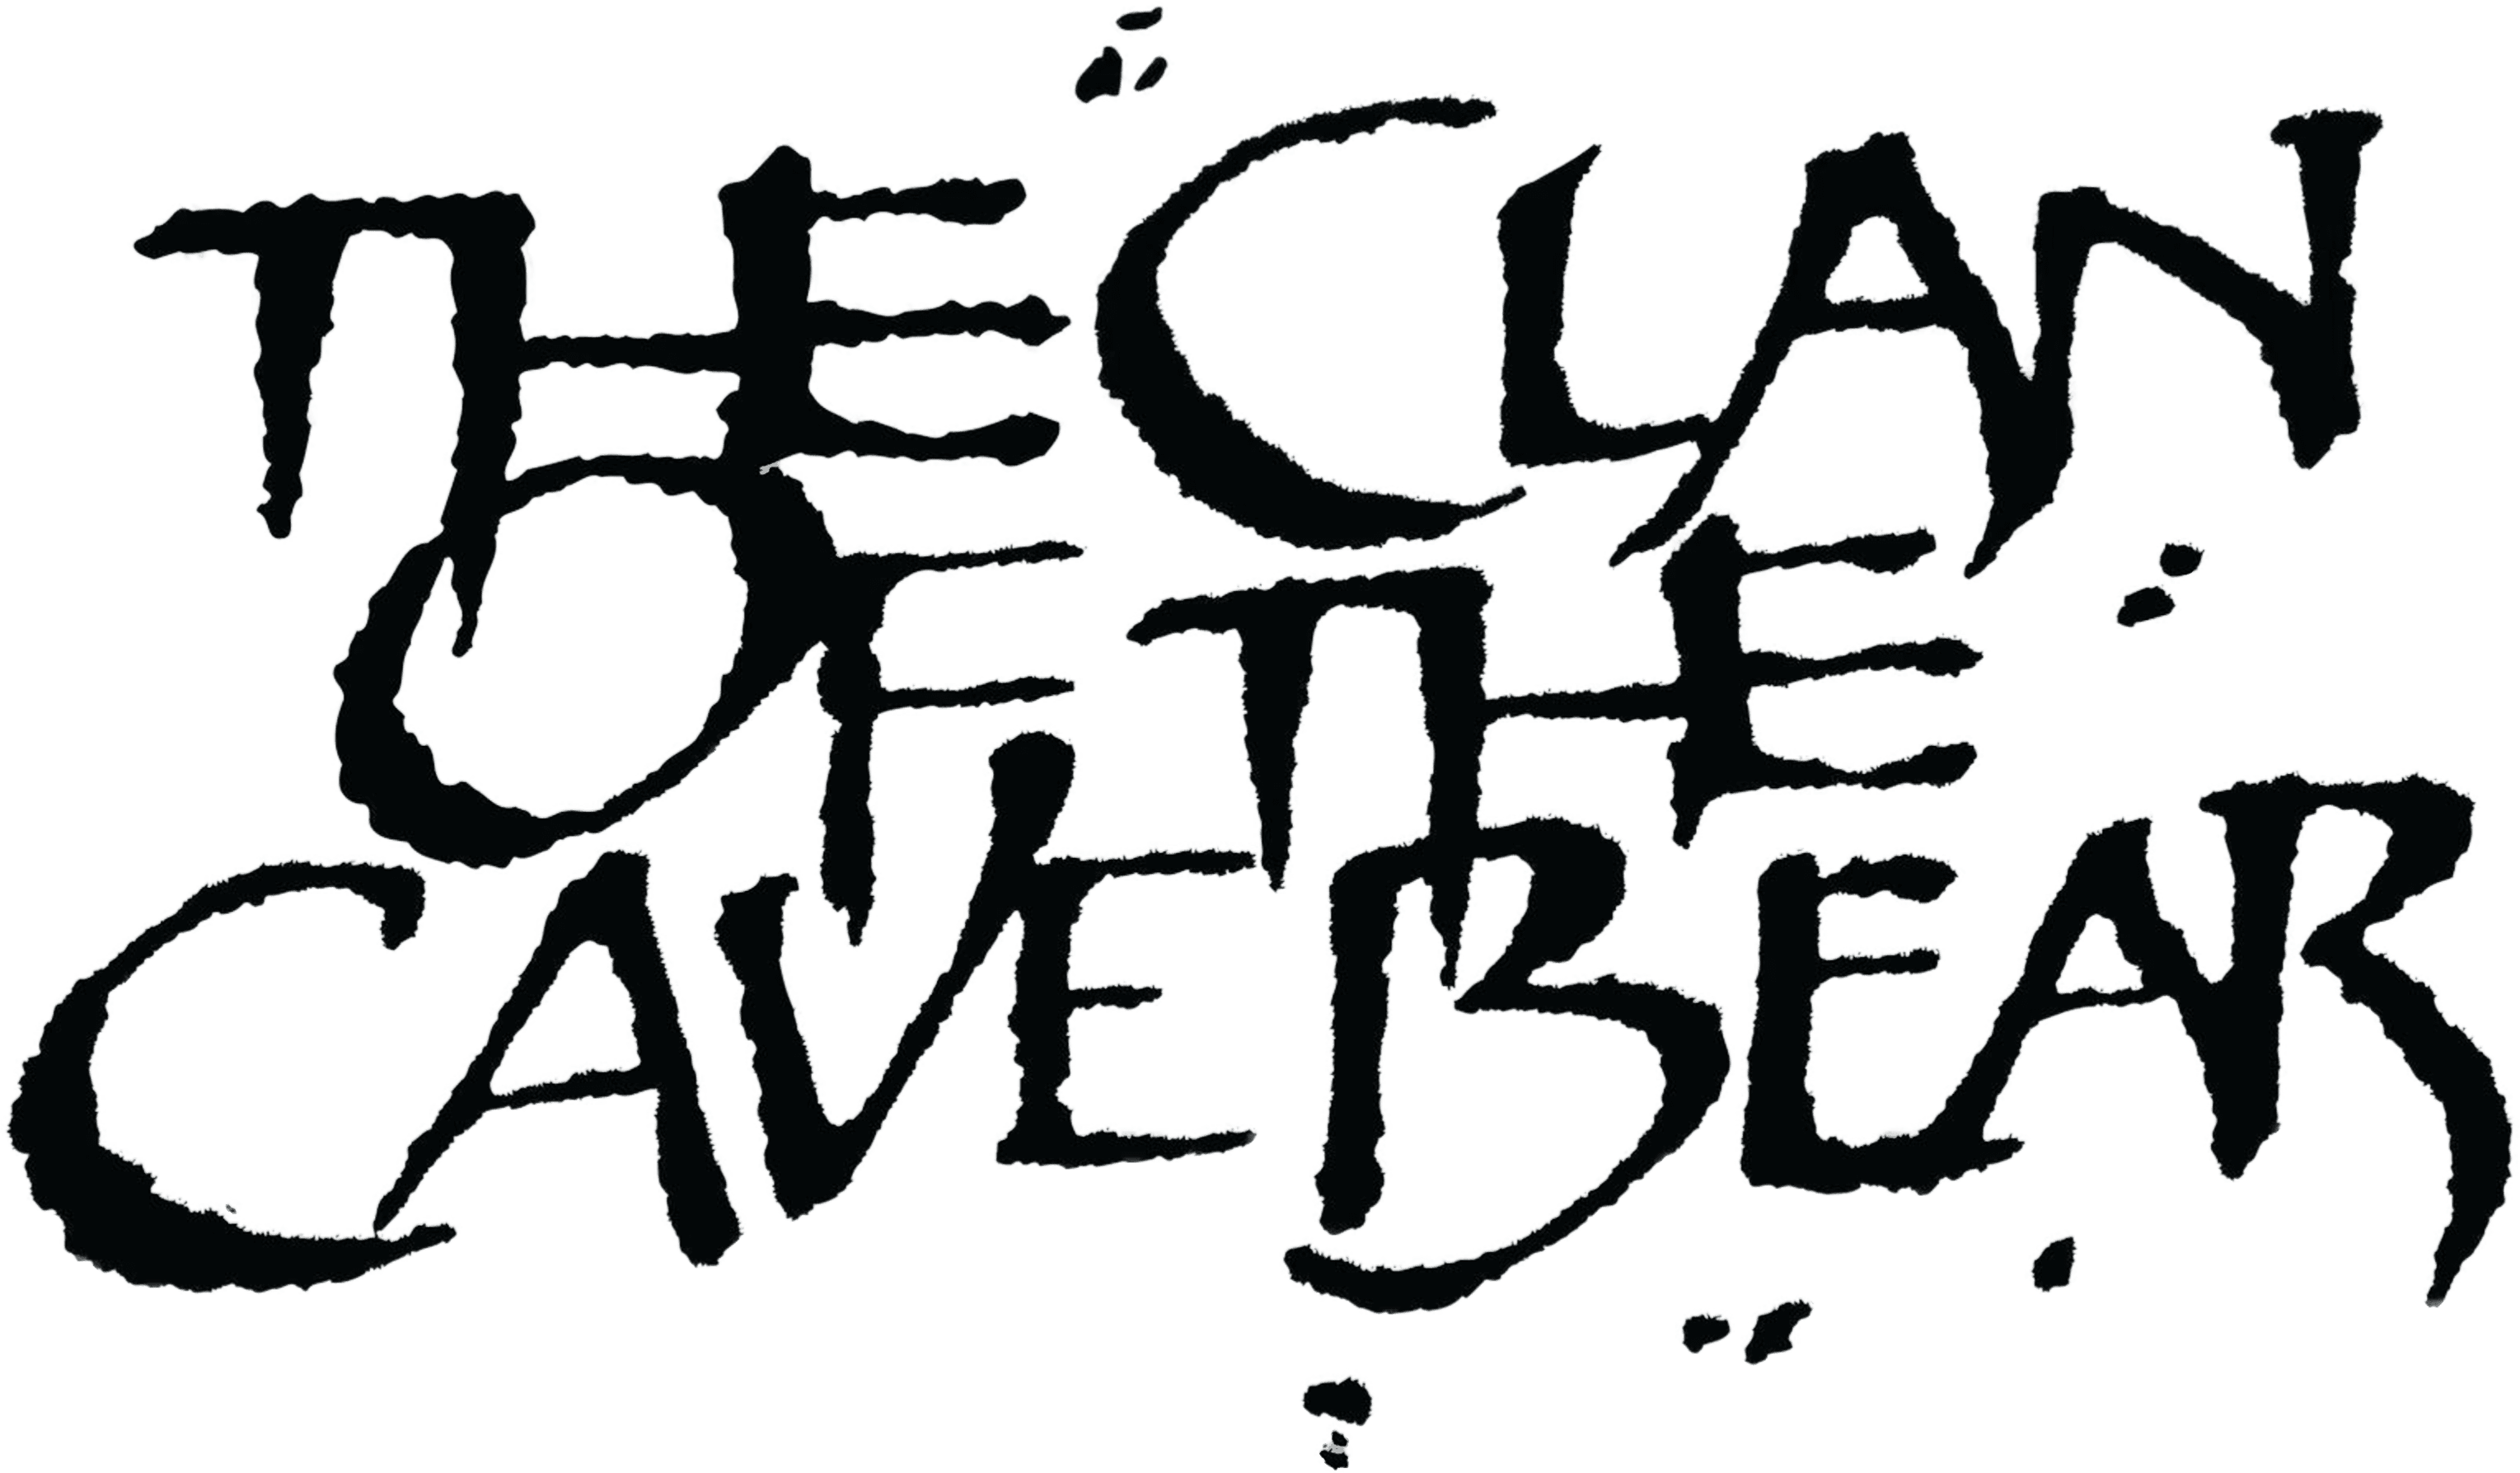 The Clan of the Cave Bear logo